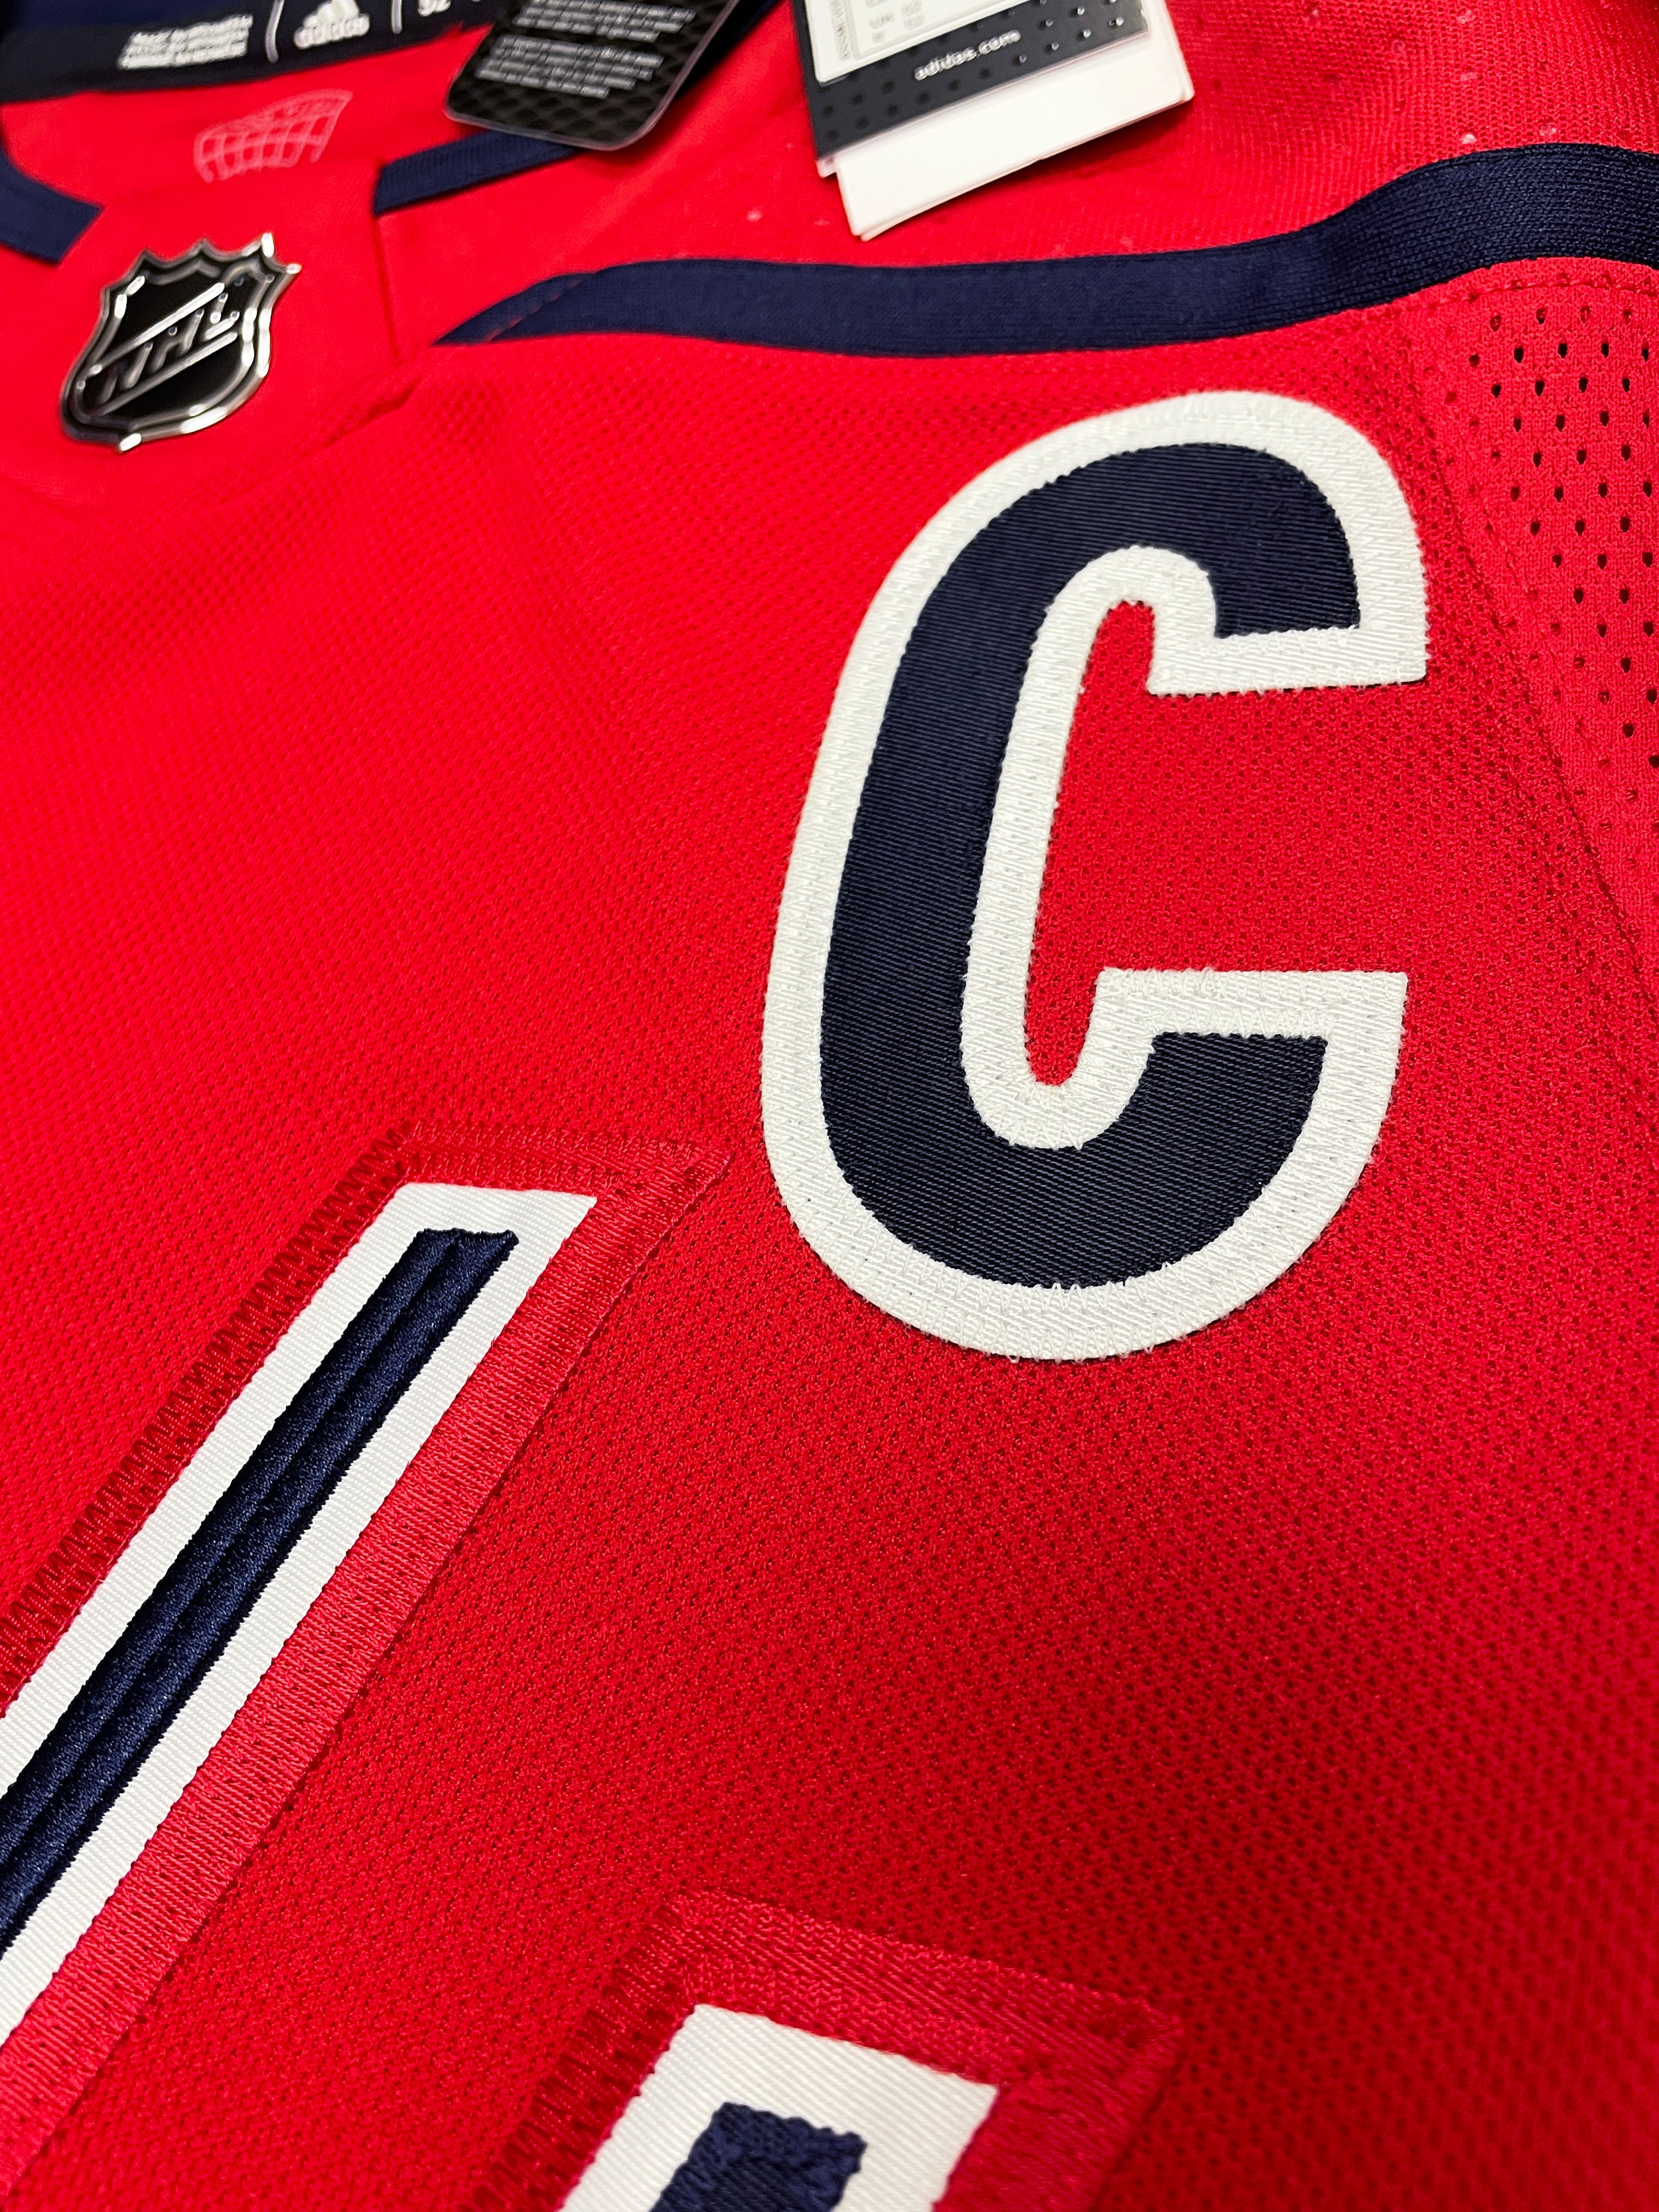 ANY NAME AND NUMBER WASHINGTON CAPITALS HOME OR AWAY AUTHENTIC